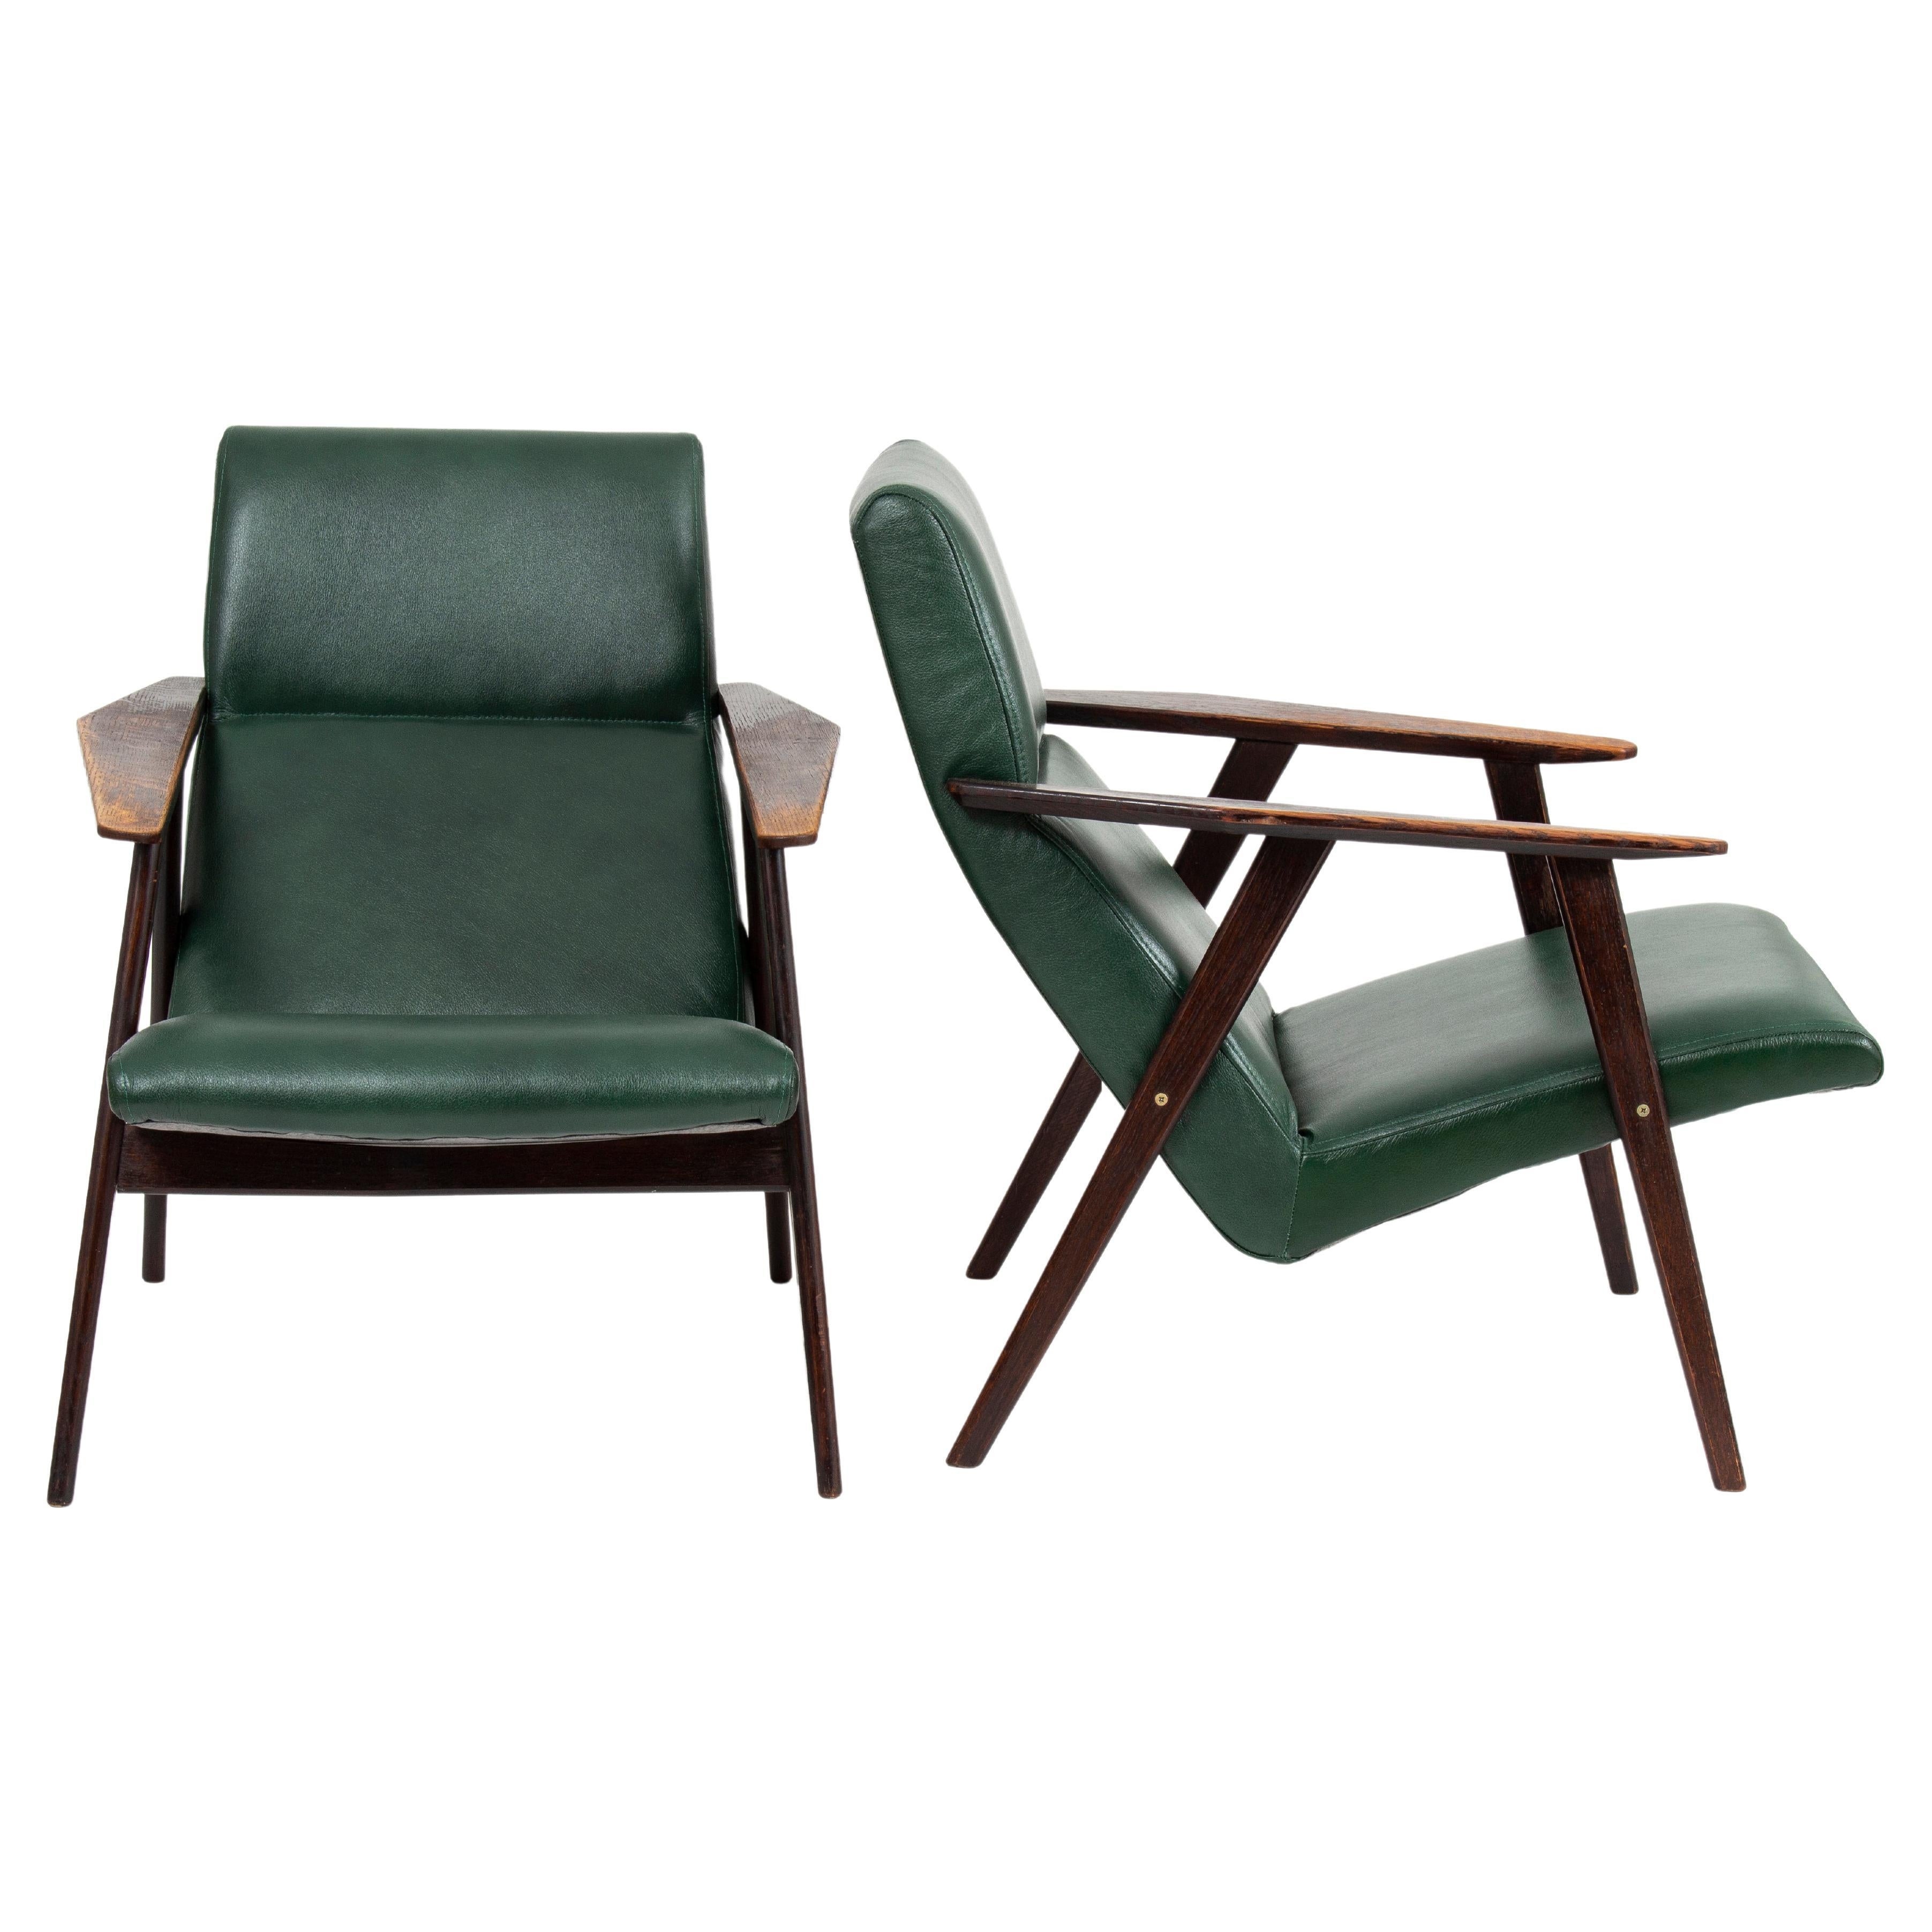 Mid-Century Modern Armchairs in Pair, ca. 1960s '2 Pieces' For Sale